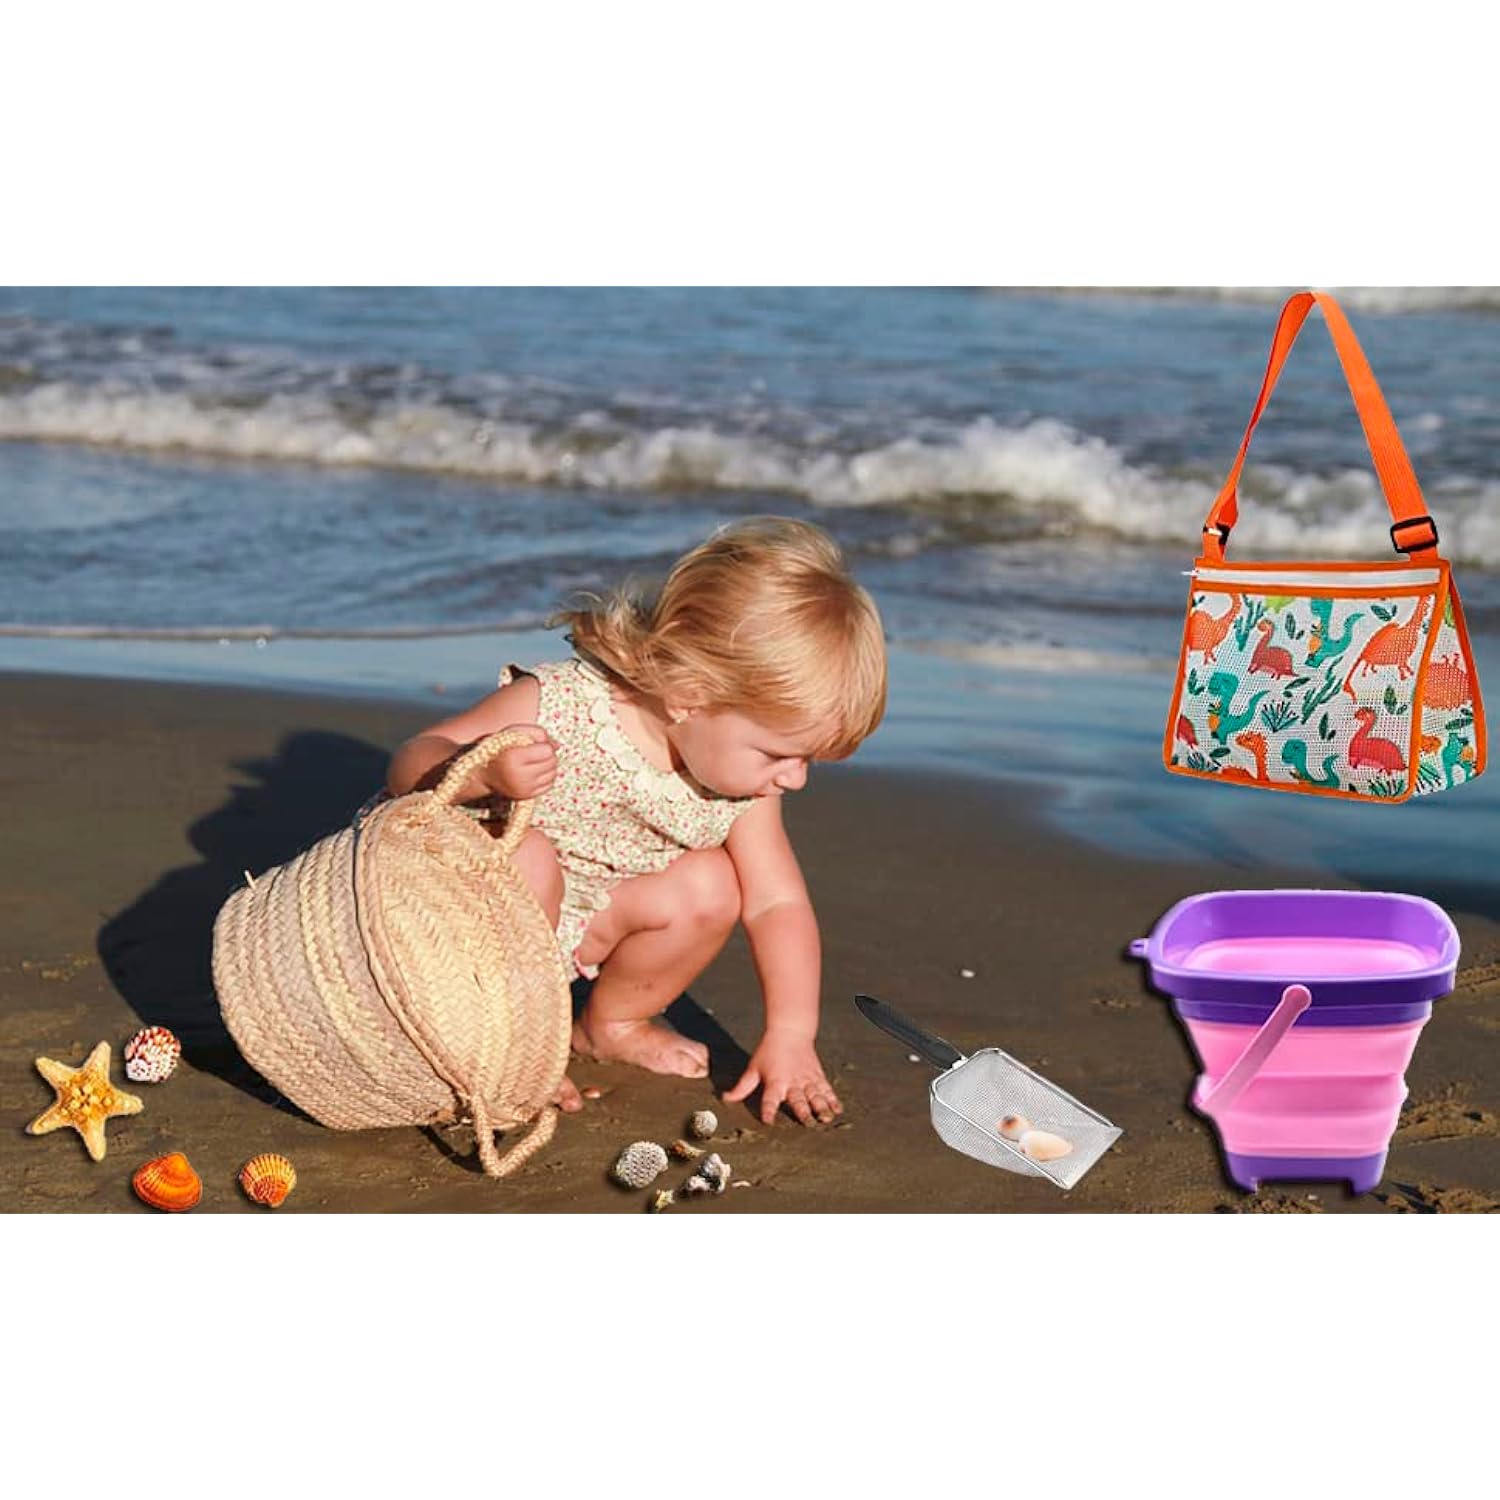 Great Choice Products Beach Toys Mesh Beach Bags For Kids 3-10, Beach Mesh Shovel With Mesh Beach Bag For Shell Collecting, Filter Sand Scoope…